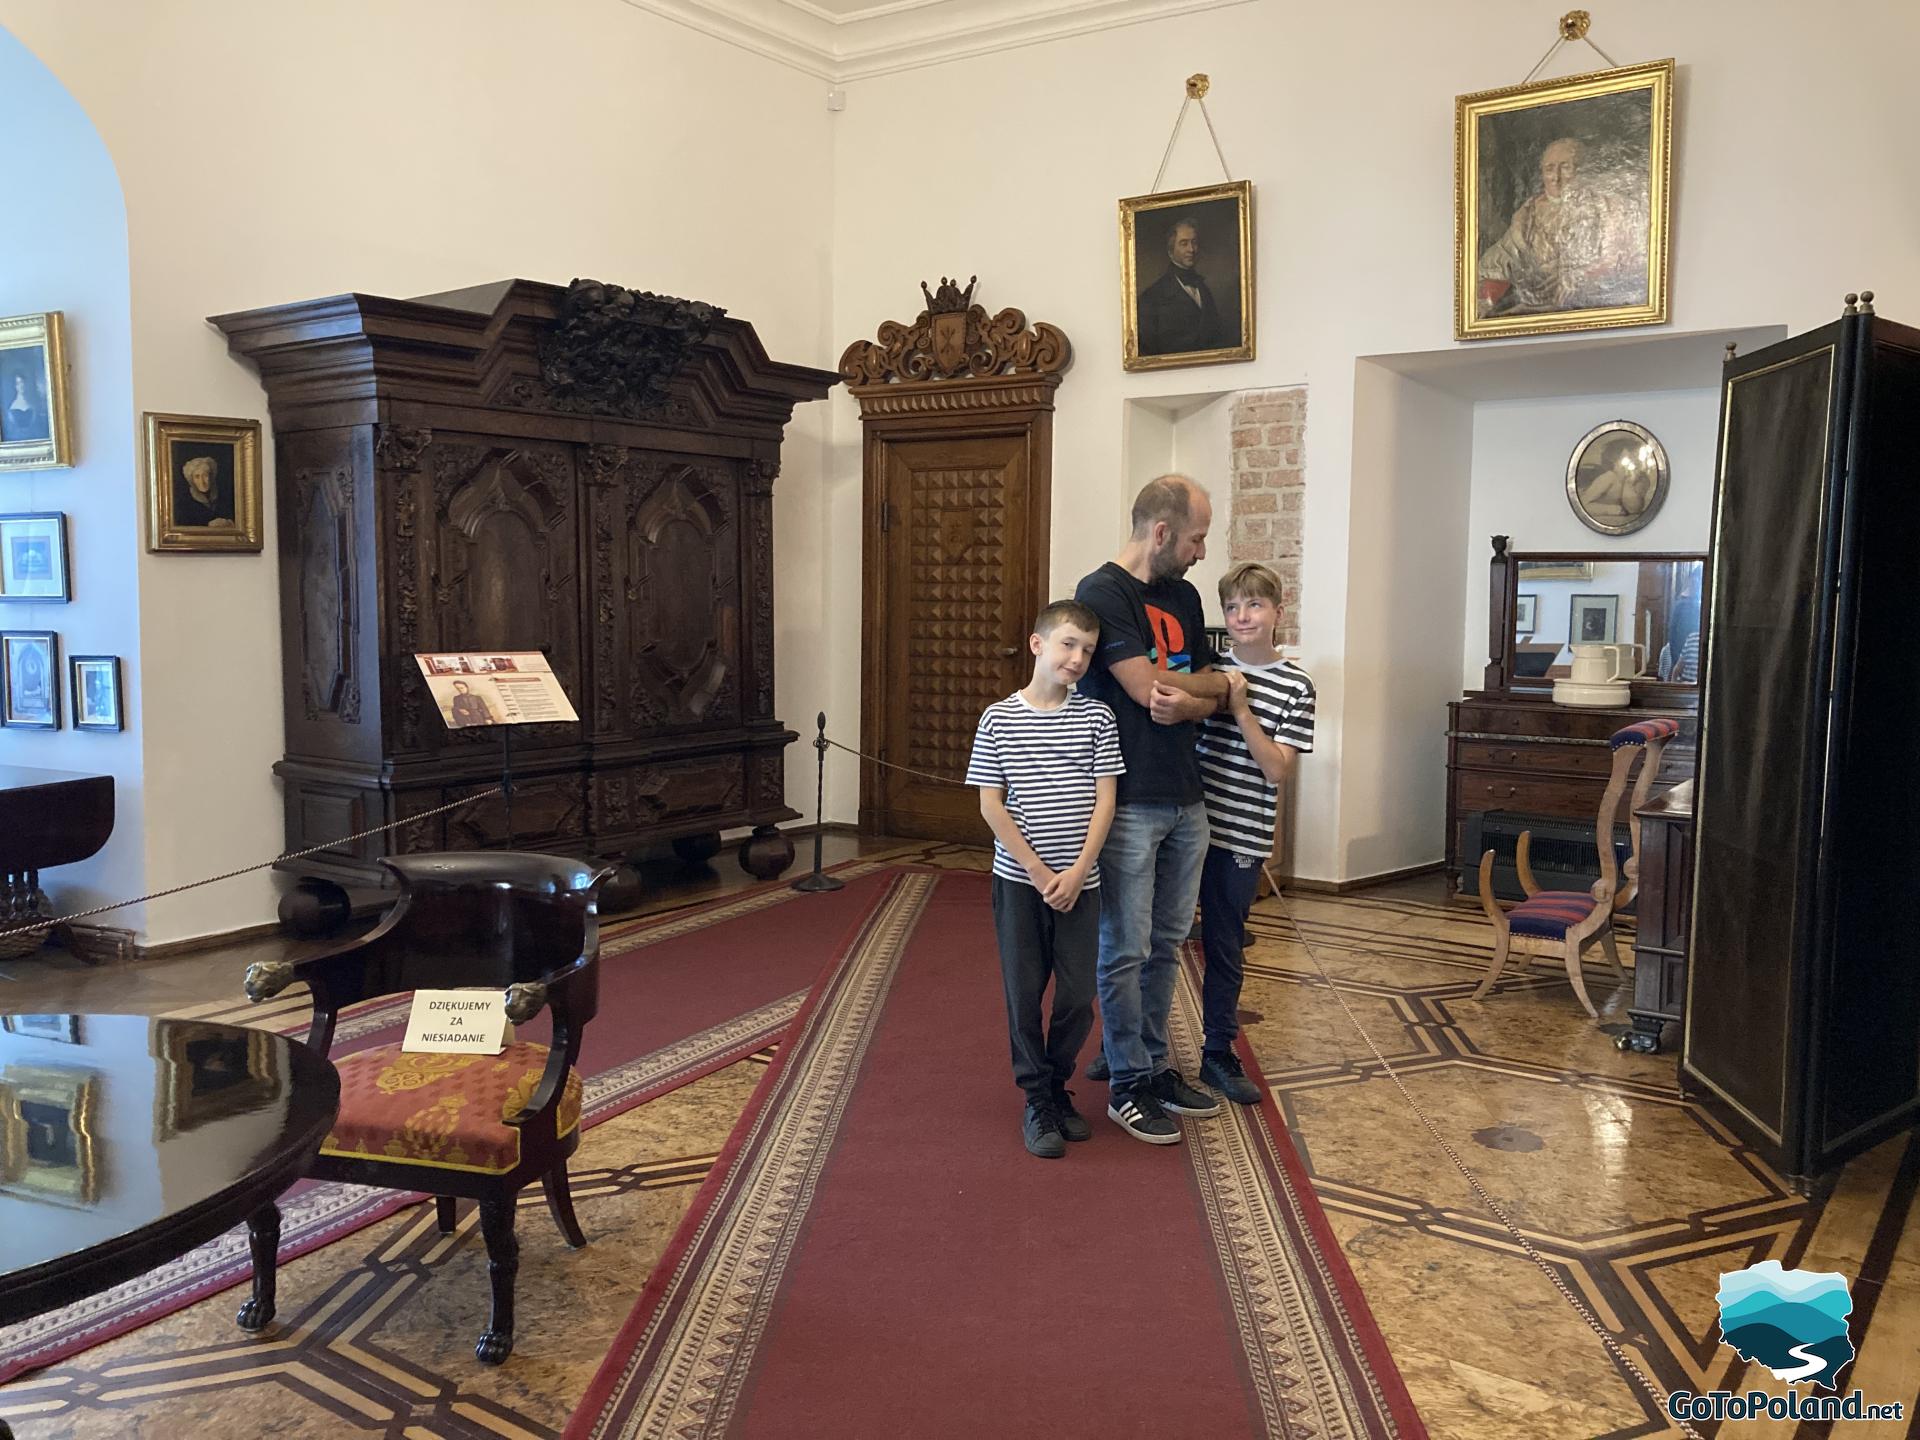 A man and two boys standing in a very ornate room with a wooden wardrobe, chairs and several paintings on the wall